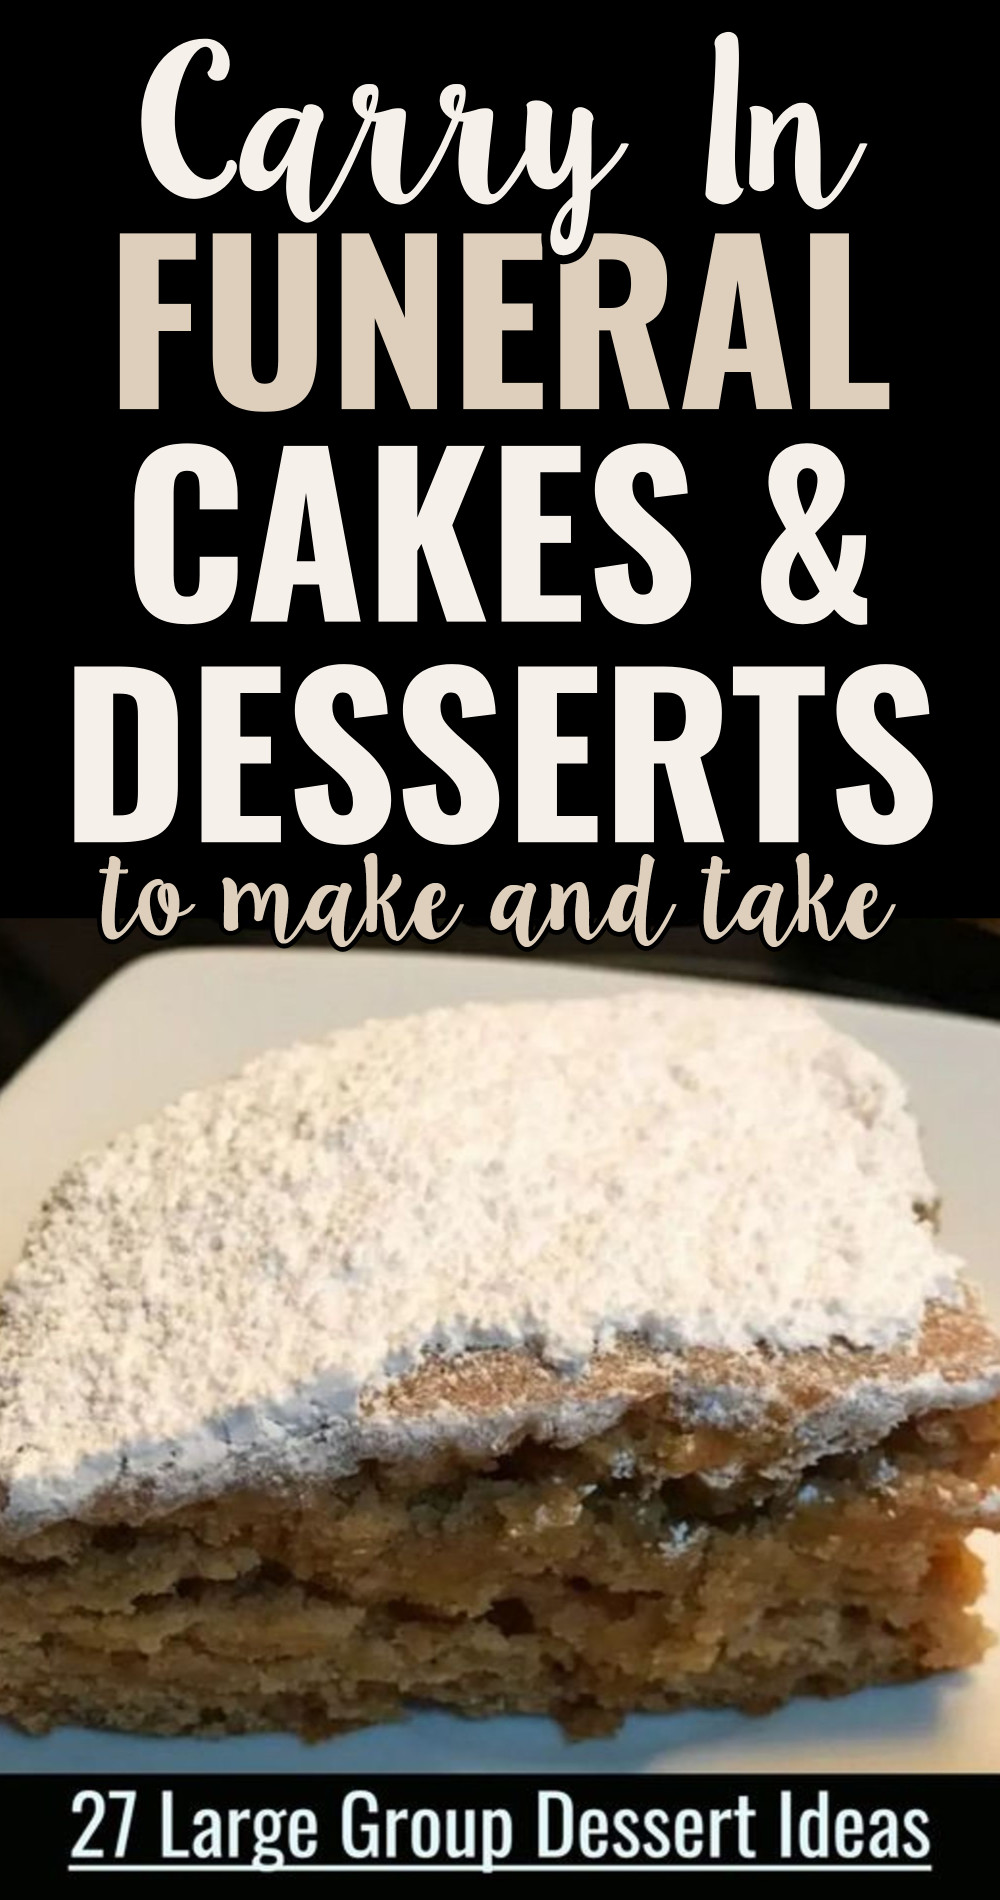 carry in funeral cakes and desserts